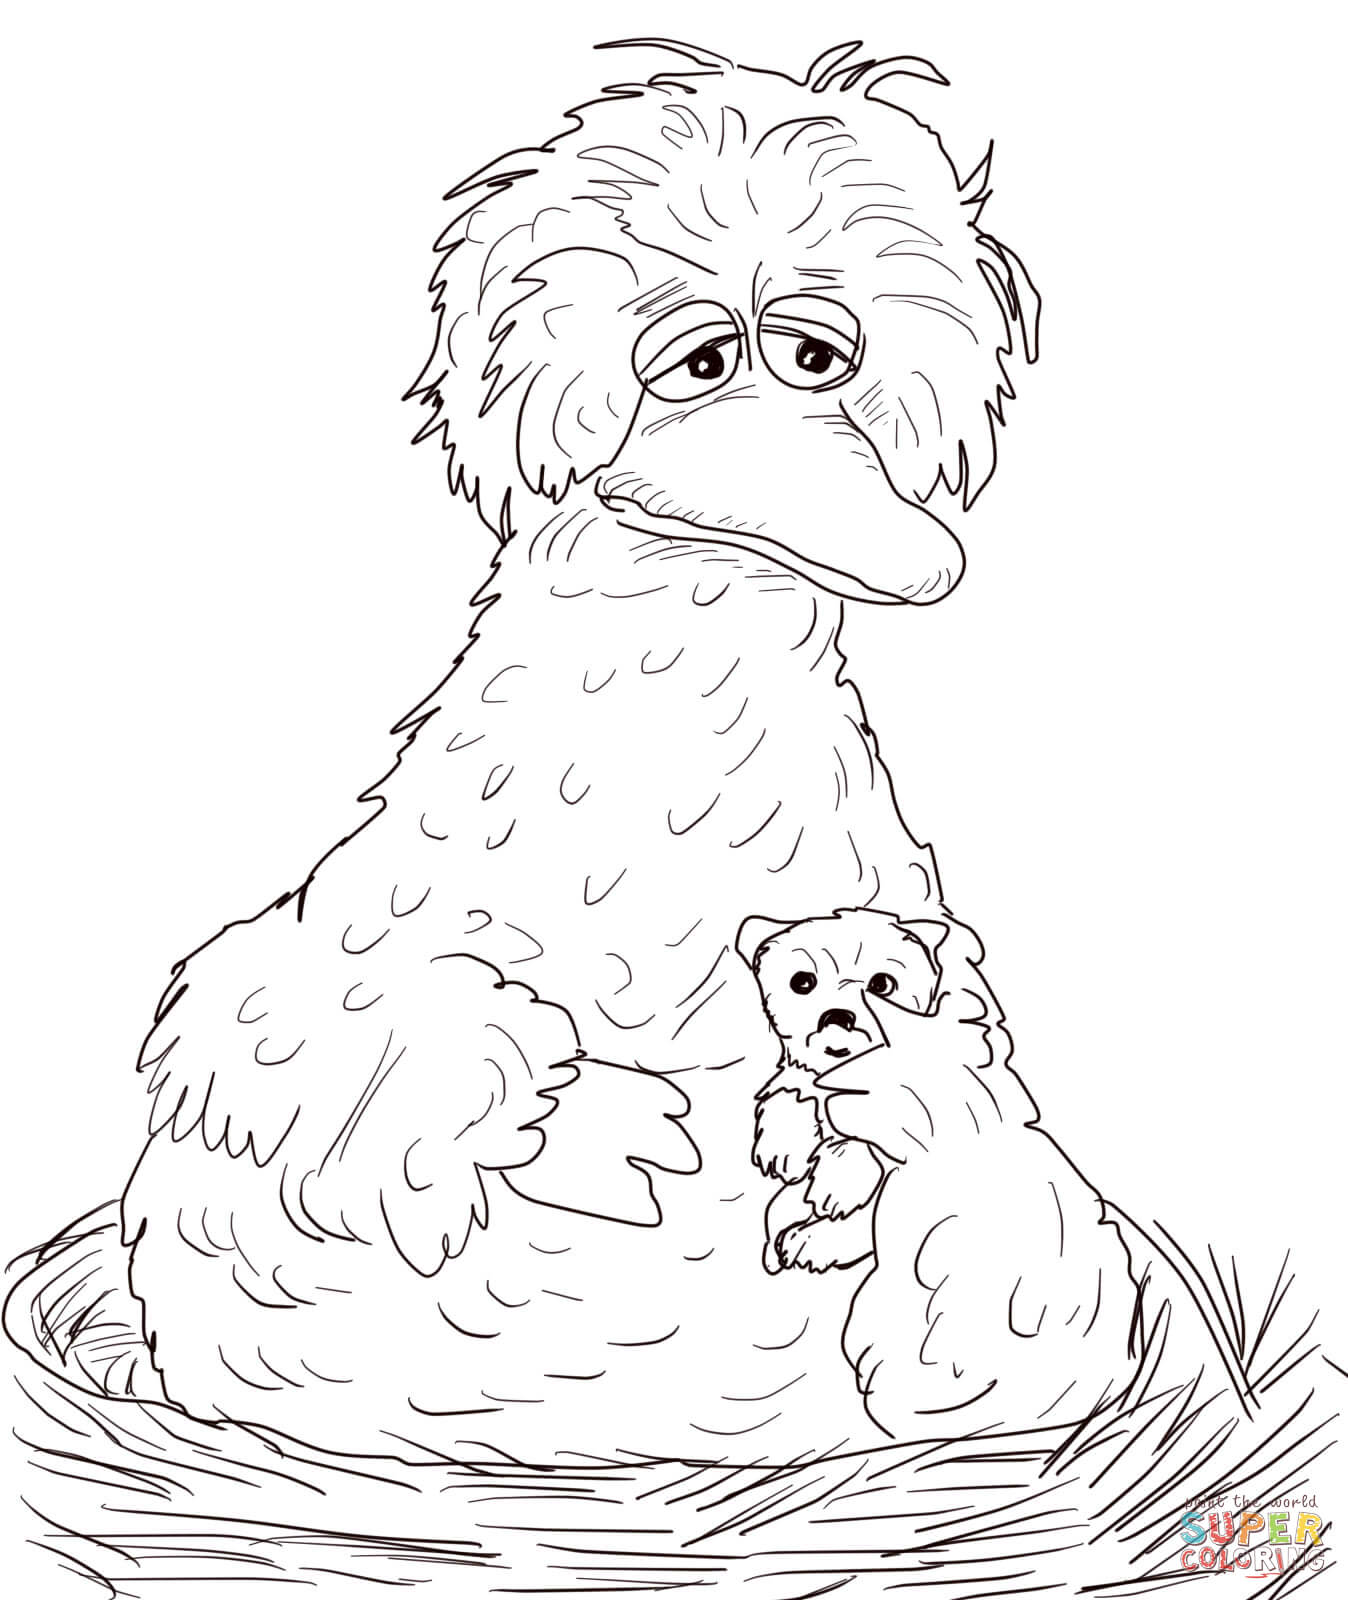 Big bird sitting on her nest coloring page free printable coloring pages